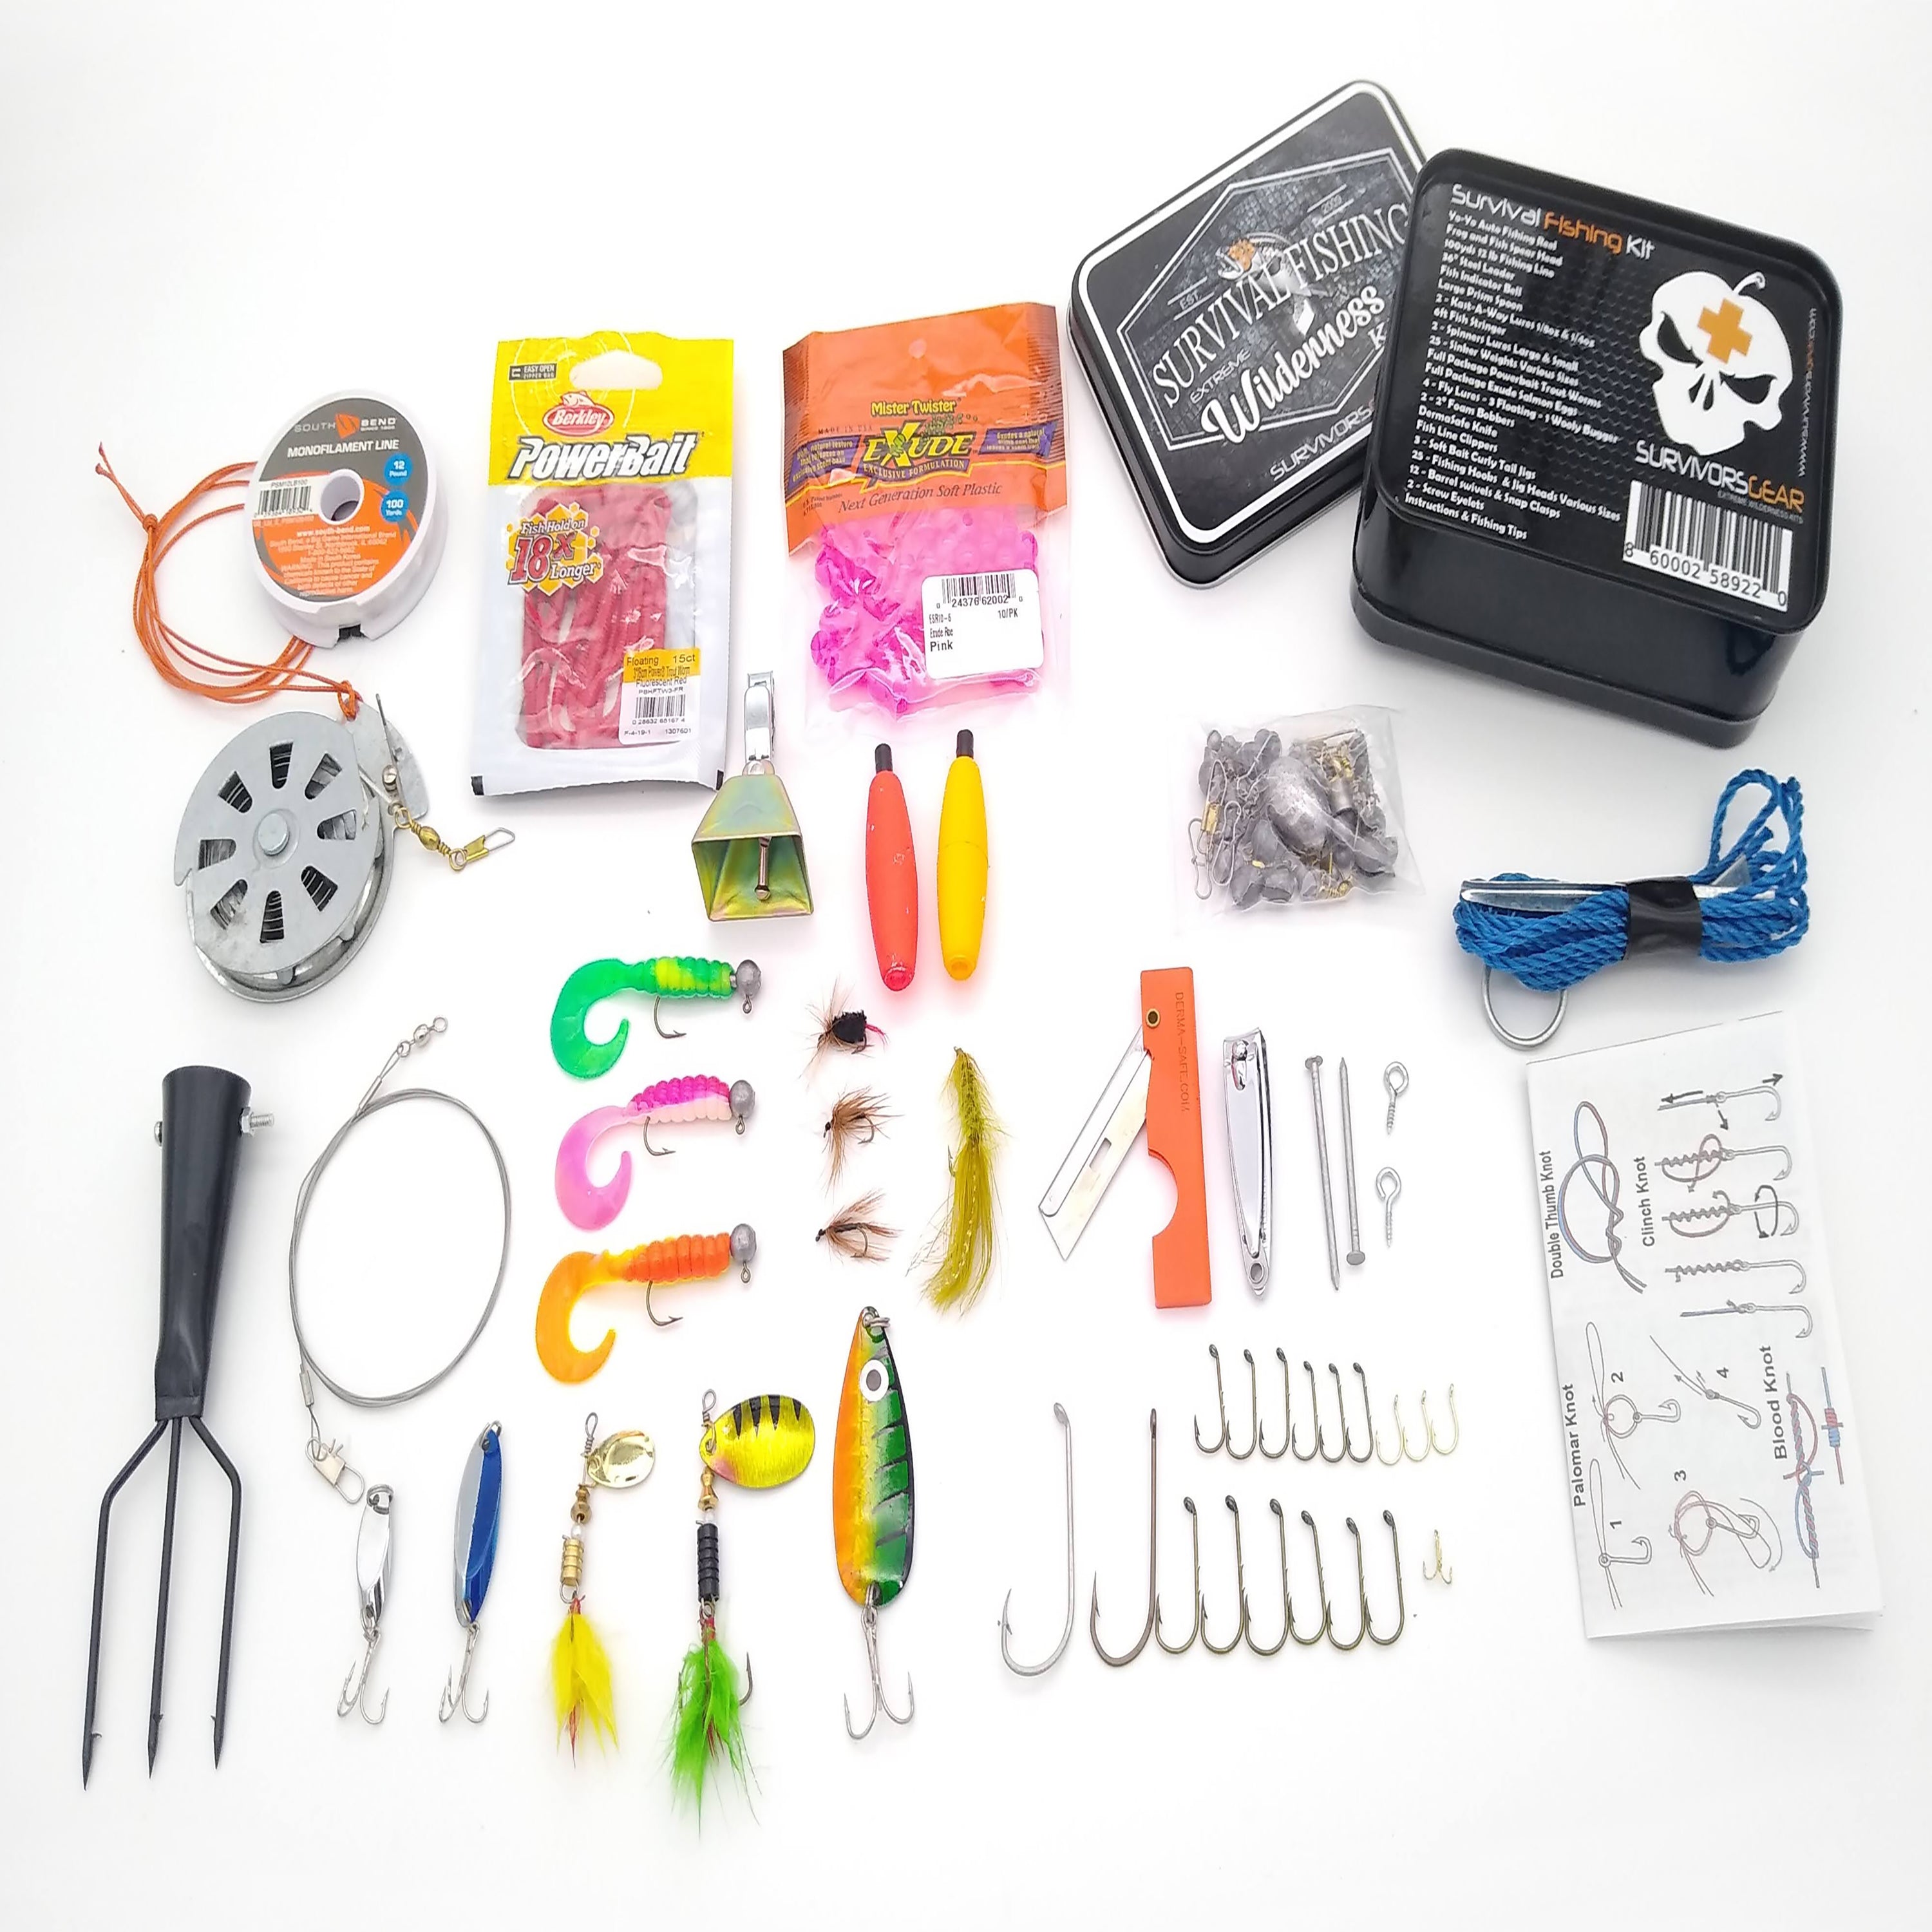 Spearfishing Gear I want for my survival kit